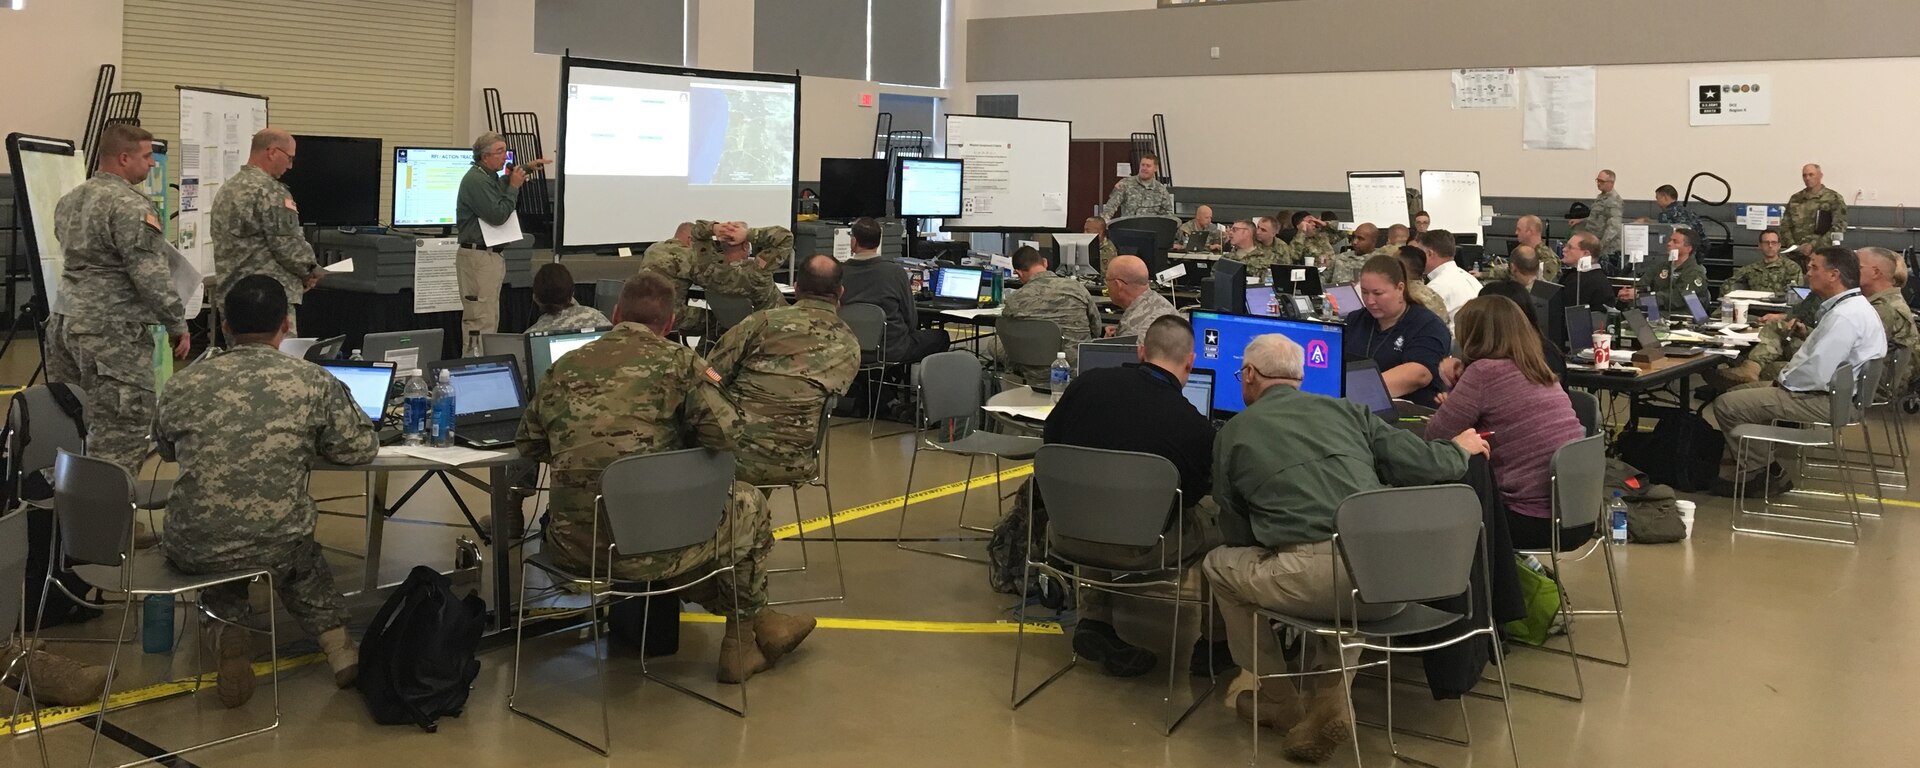 Soldiers assigned to Army North along with civilians working for the Federal Emergency Management Agency, or FEMA, and other Oregon state agencies conduct scenario based crises management training at the Oregon National Guard center in Clackamas, outside of Portland, Ore., Oct. 30-Nov. 4.